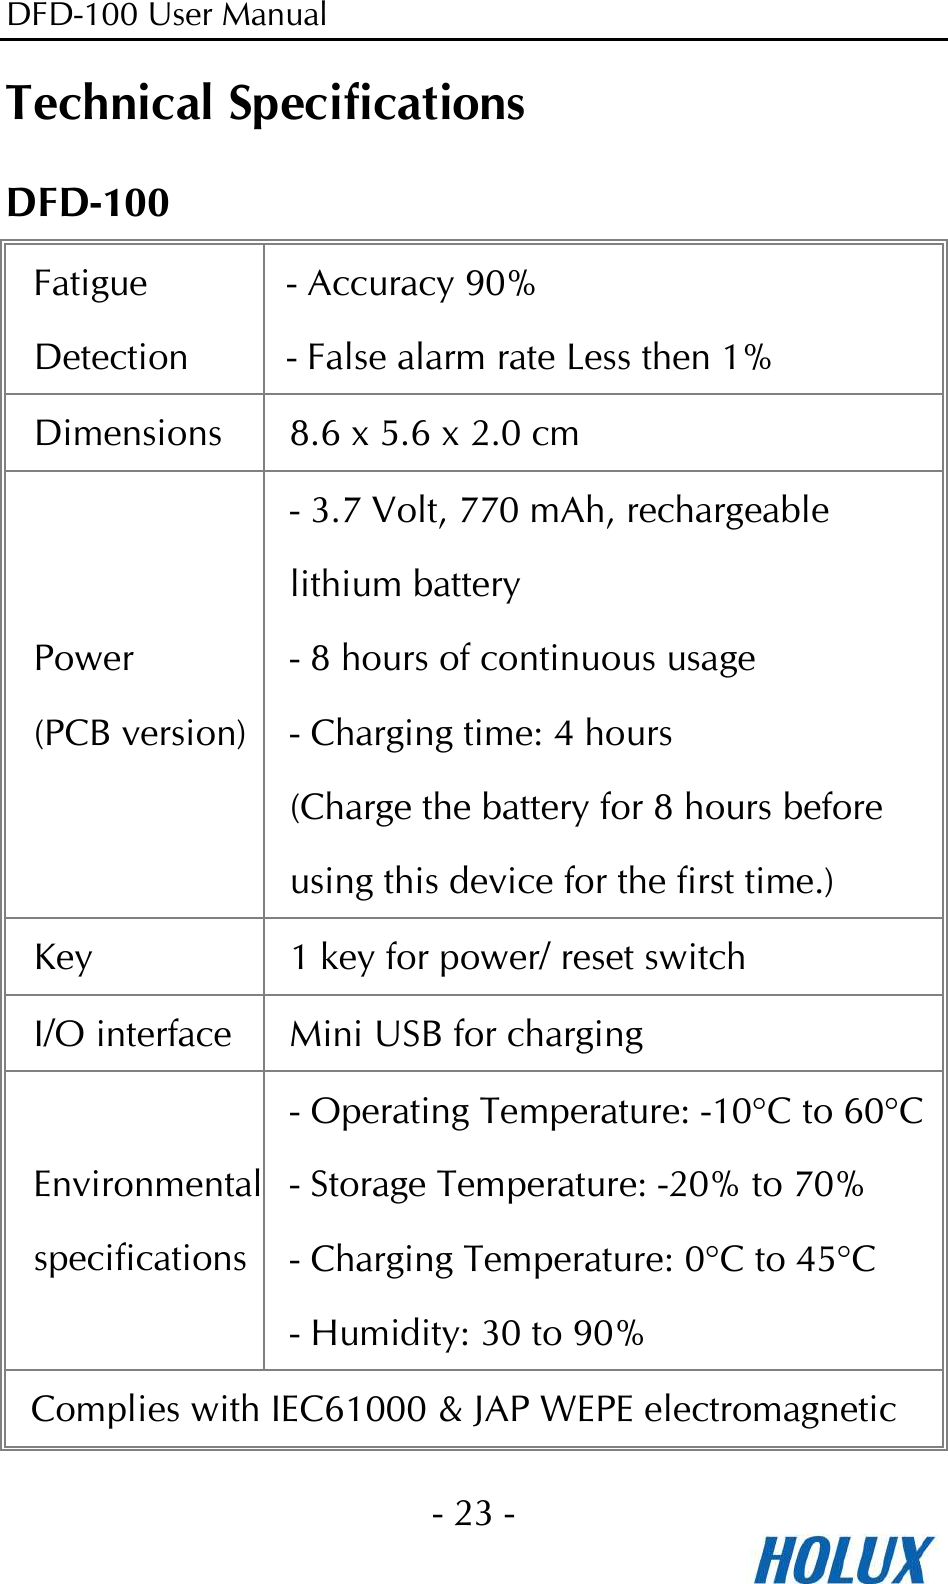 DFD-100 User Manual - 23 -  Technical Specifications DFD-100 Fatigue Detection - Accuracy 90% - False alarm rate Less then 1% Dimensions 8.6 x 5.6 x 2.0 cm Power   (PCB version) - 3.7 Volt, 770 mAh, rechargeable lithium battery - 8 hours of continuous usage - Charging time: 4 hours (Charge the battery for 8 hours before using this device for the first time.) Key  1 key for power/ reset switch I/O interface Mini USB for charging Environmental specifications - Operating Temperature: -10°C to 60°C - Storage Temperature: -20% to 70% - Charging Temperature: 0°C to 45°C - Humidity: 30 to 90% Complies with IEC61000 &amp; JAP WEPE electromagnetic 